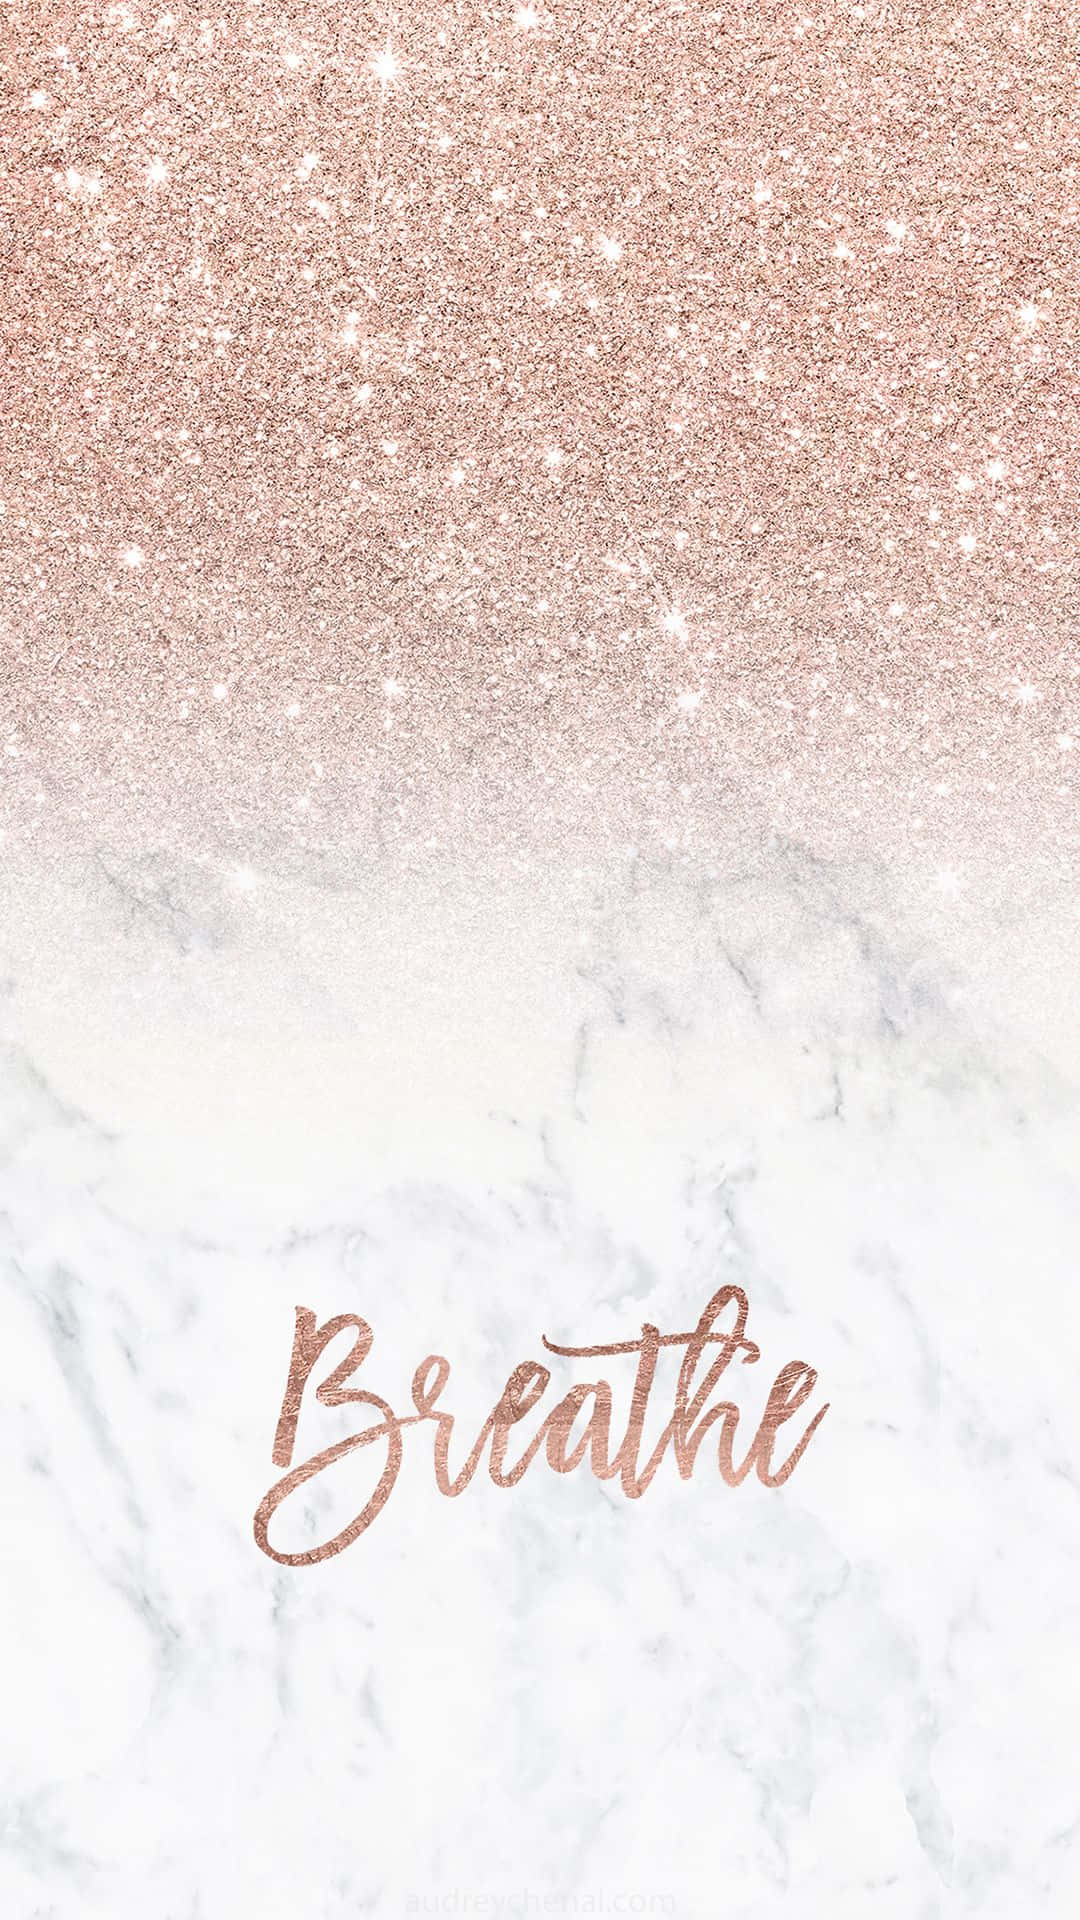 Download Stylish Rose Gold iPhone Background | Wallpapers.com